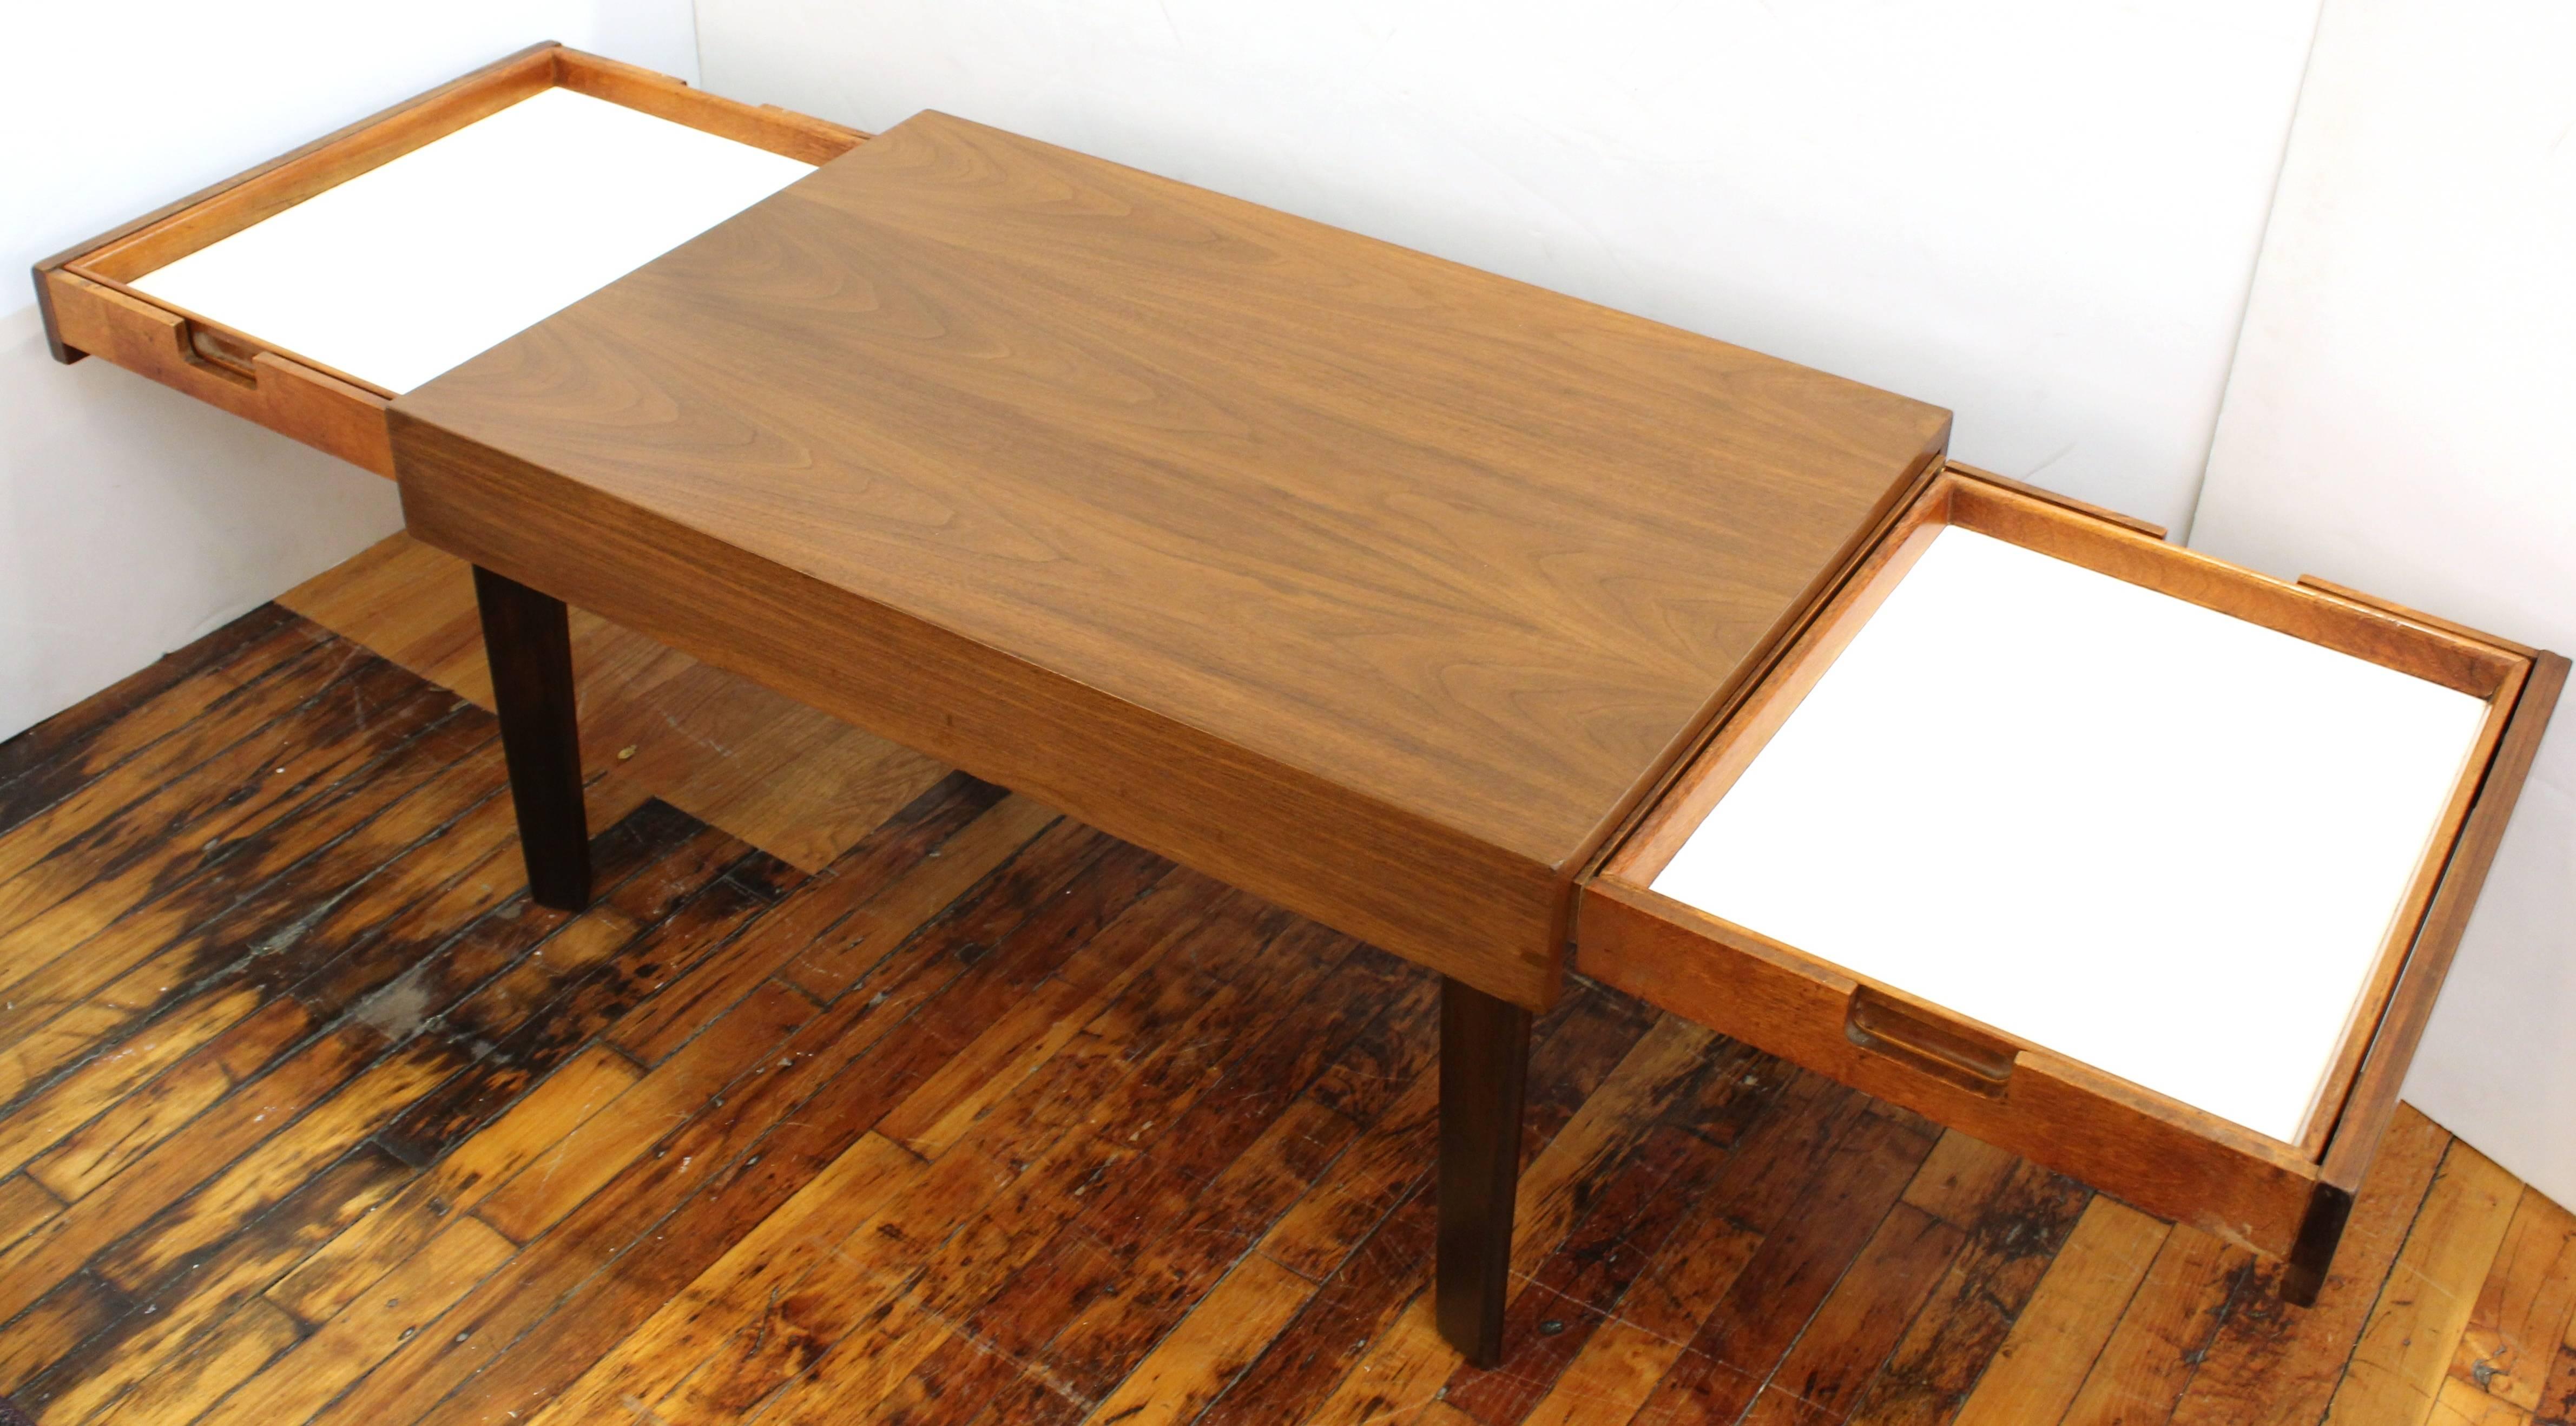 Coffee table by George Nelson for Herman Miller features two extendable drawers. Each drawer is a removable tray that can be inverted to make a writing surface with wood finish. The table is in good vintage condition consistent with age and use.